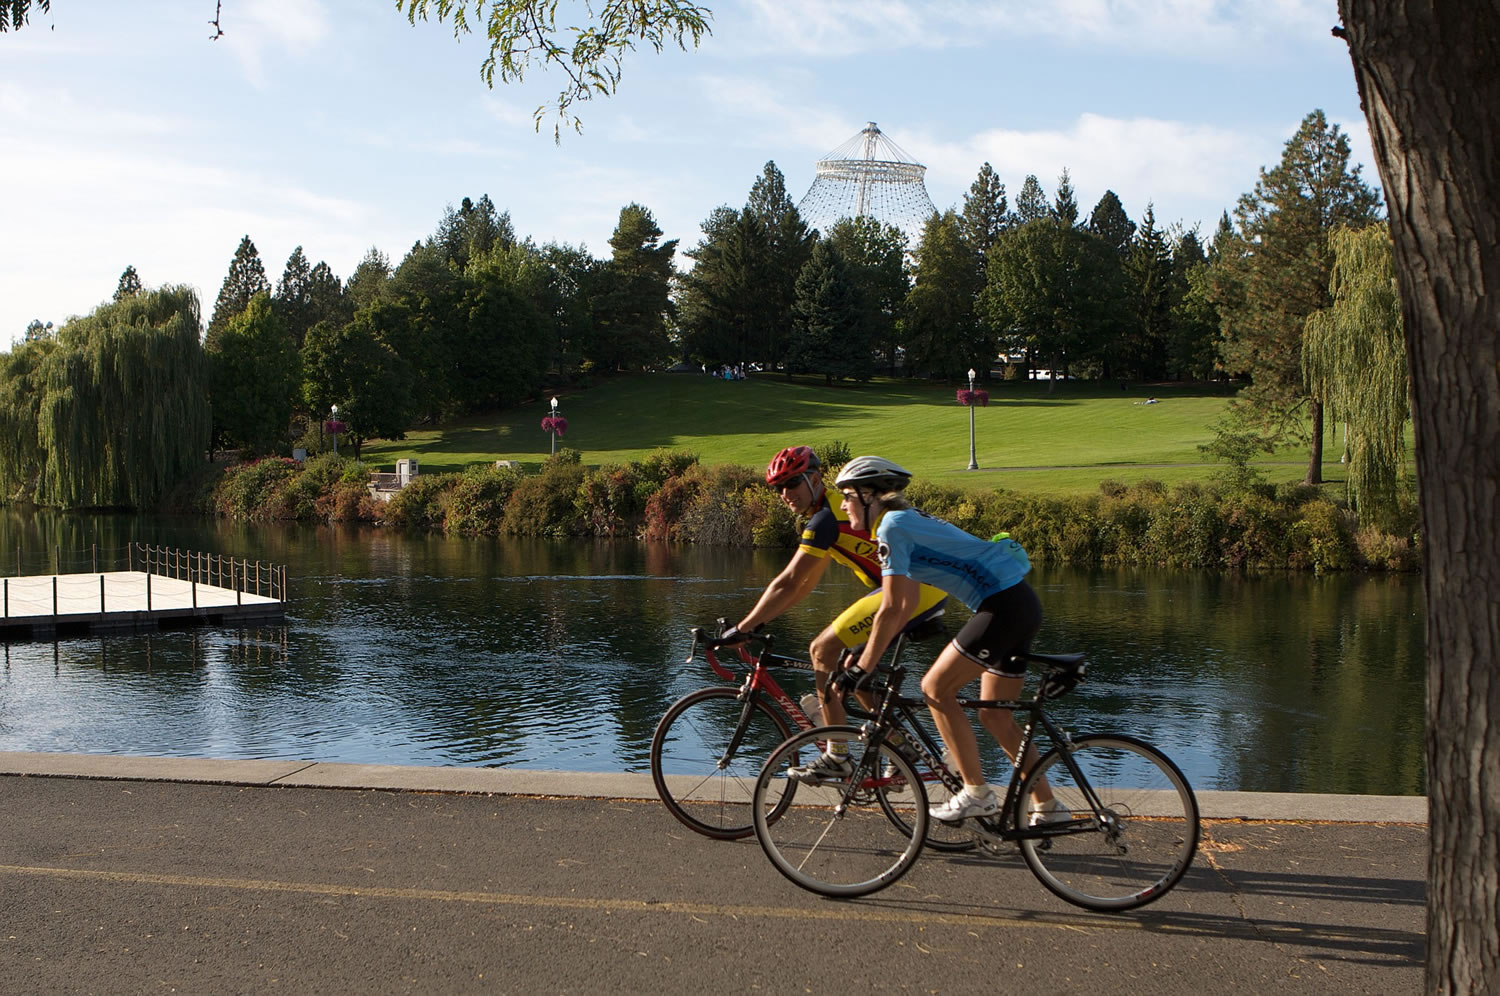 Bike riders along a section of the Centennial Trail, a 60-mile paved biking and hiking trail that connects Spokane with Coeur d'Alene, Idaho, and Lake Coeur d'Alene.